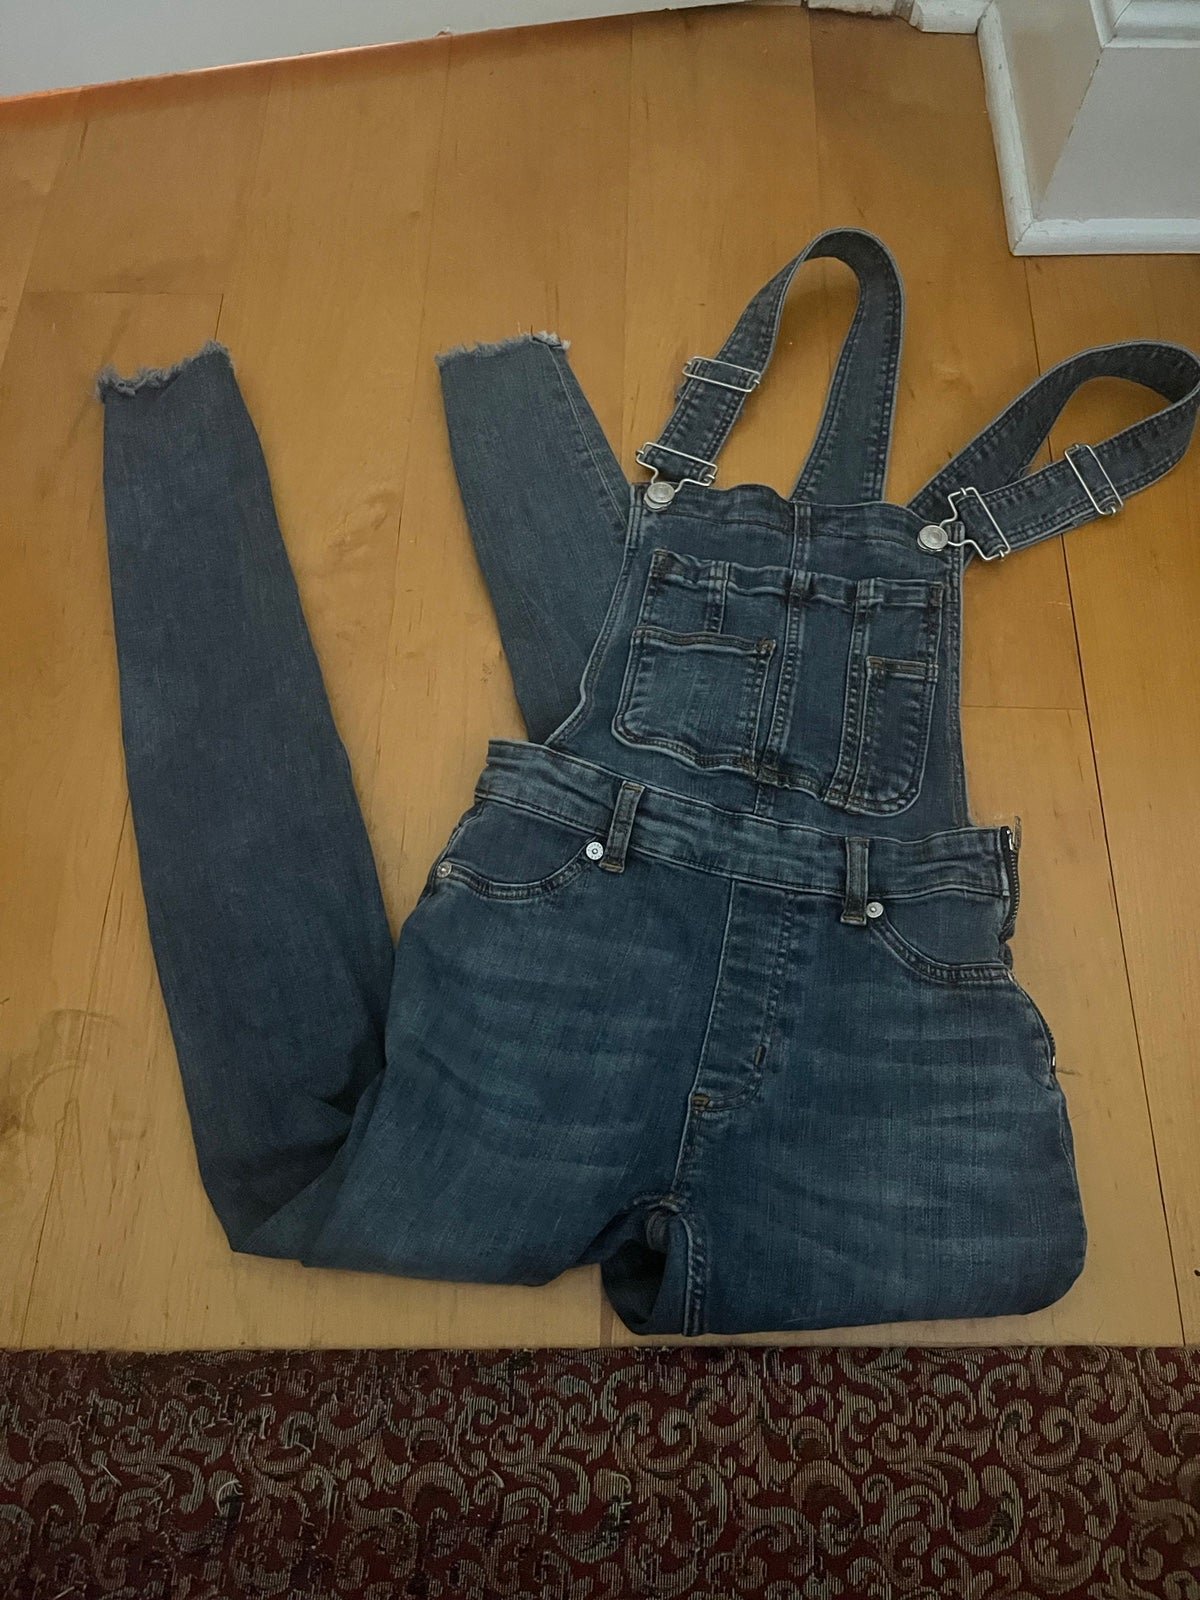 Promotions  Free people Jean overalls pglAUzSq4 Great